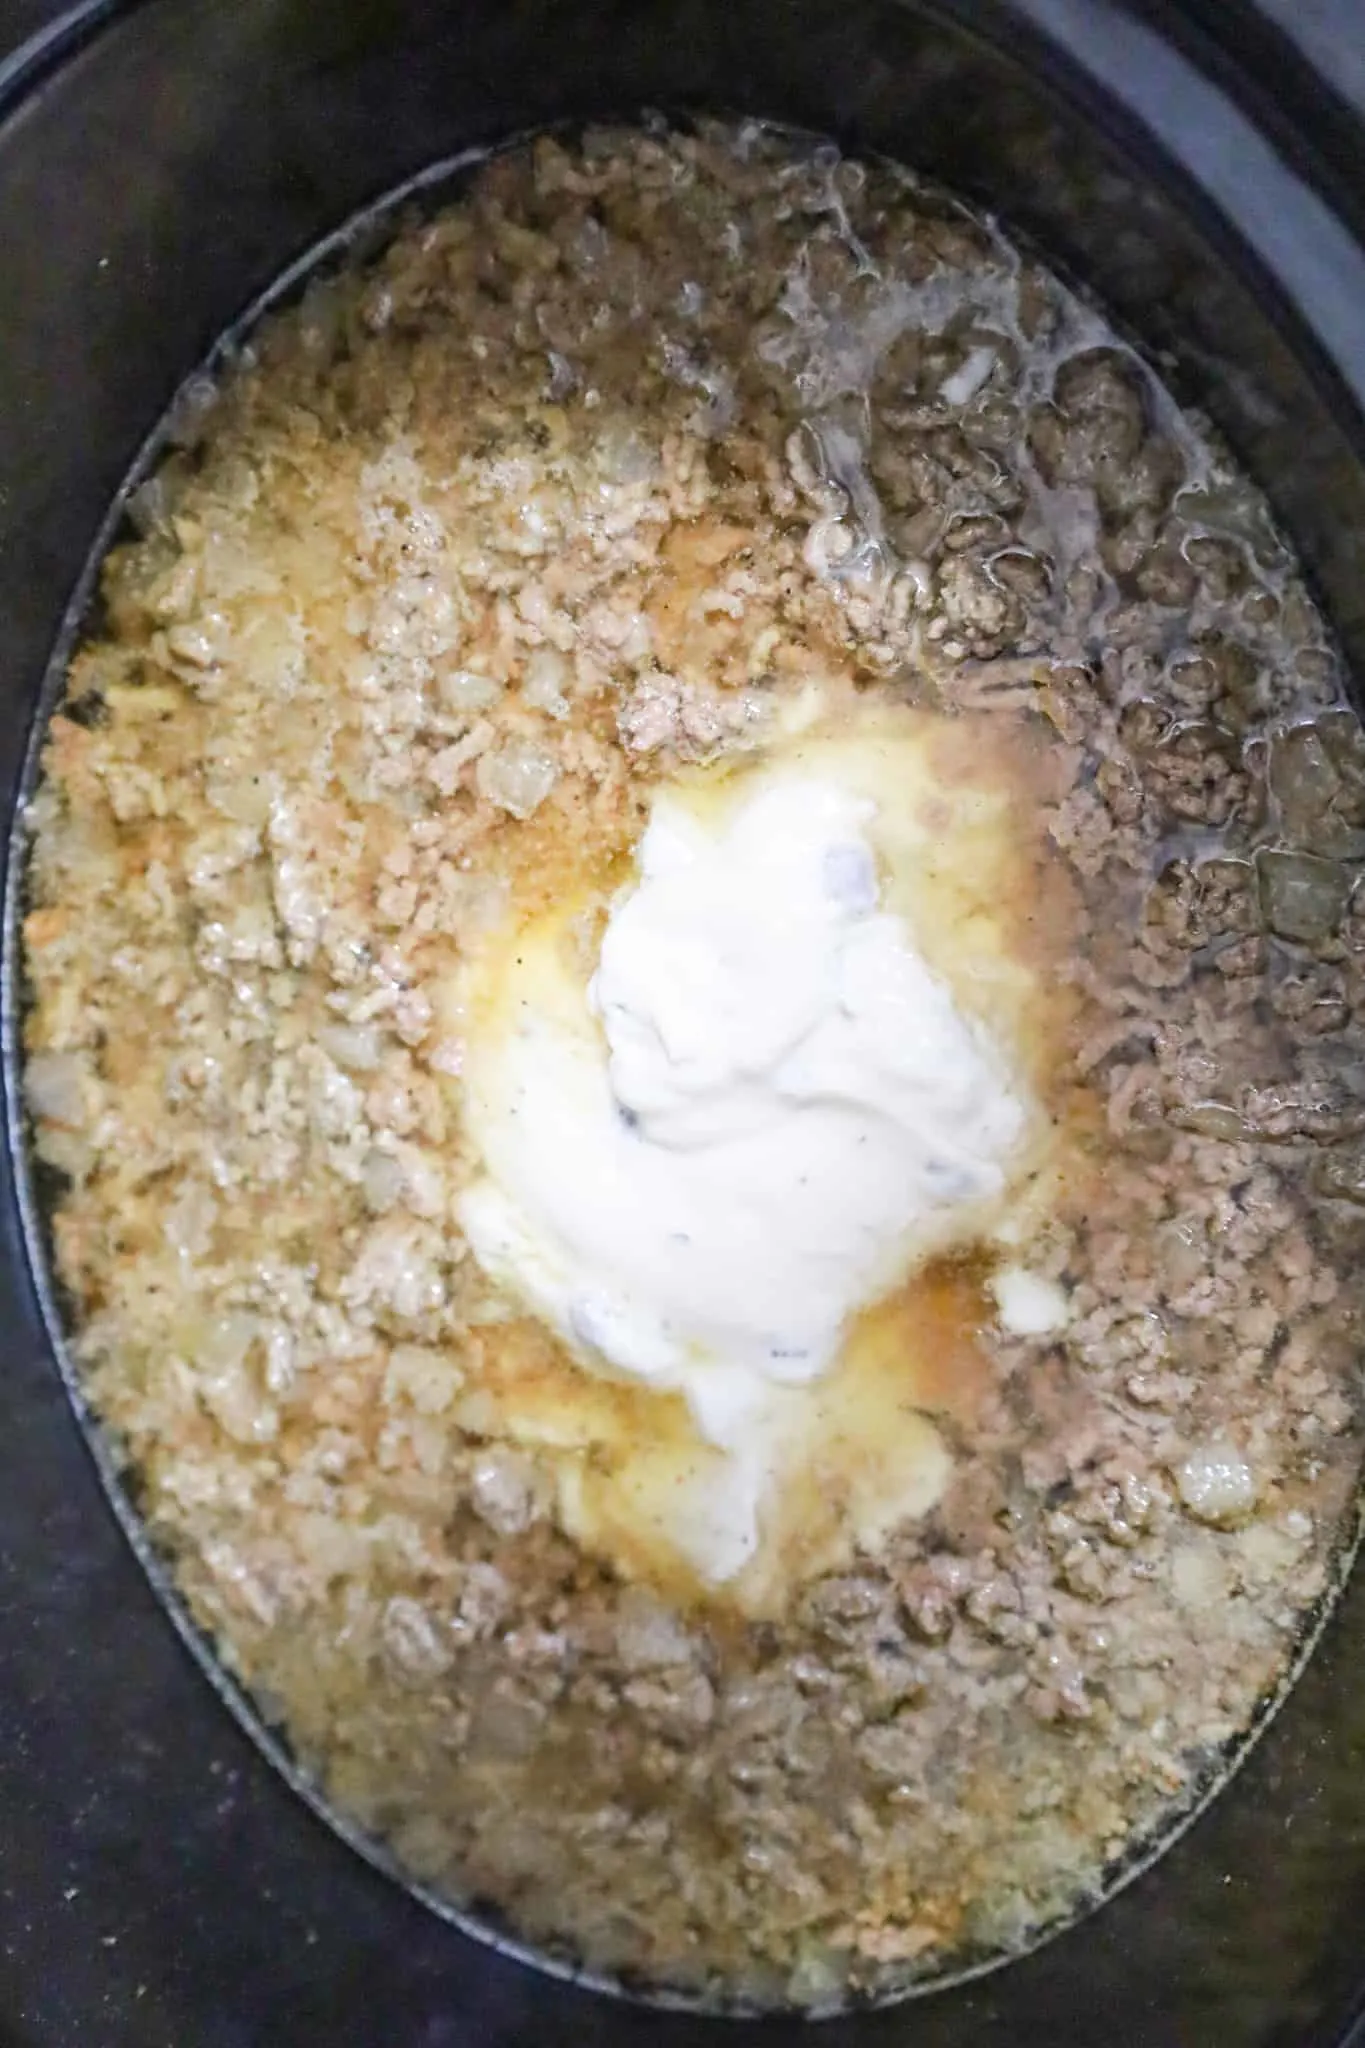 condensed cream of mushroom soup on top of ground beef and beef broth mixture in a crock pot